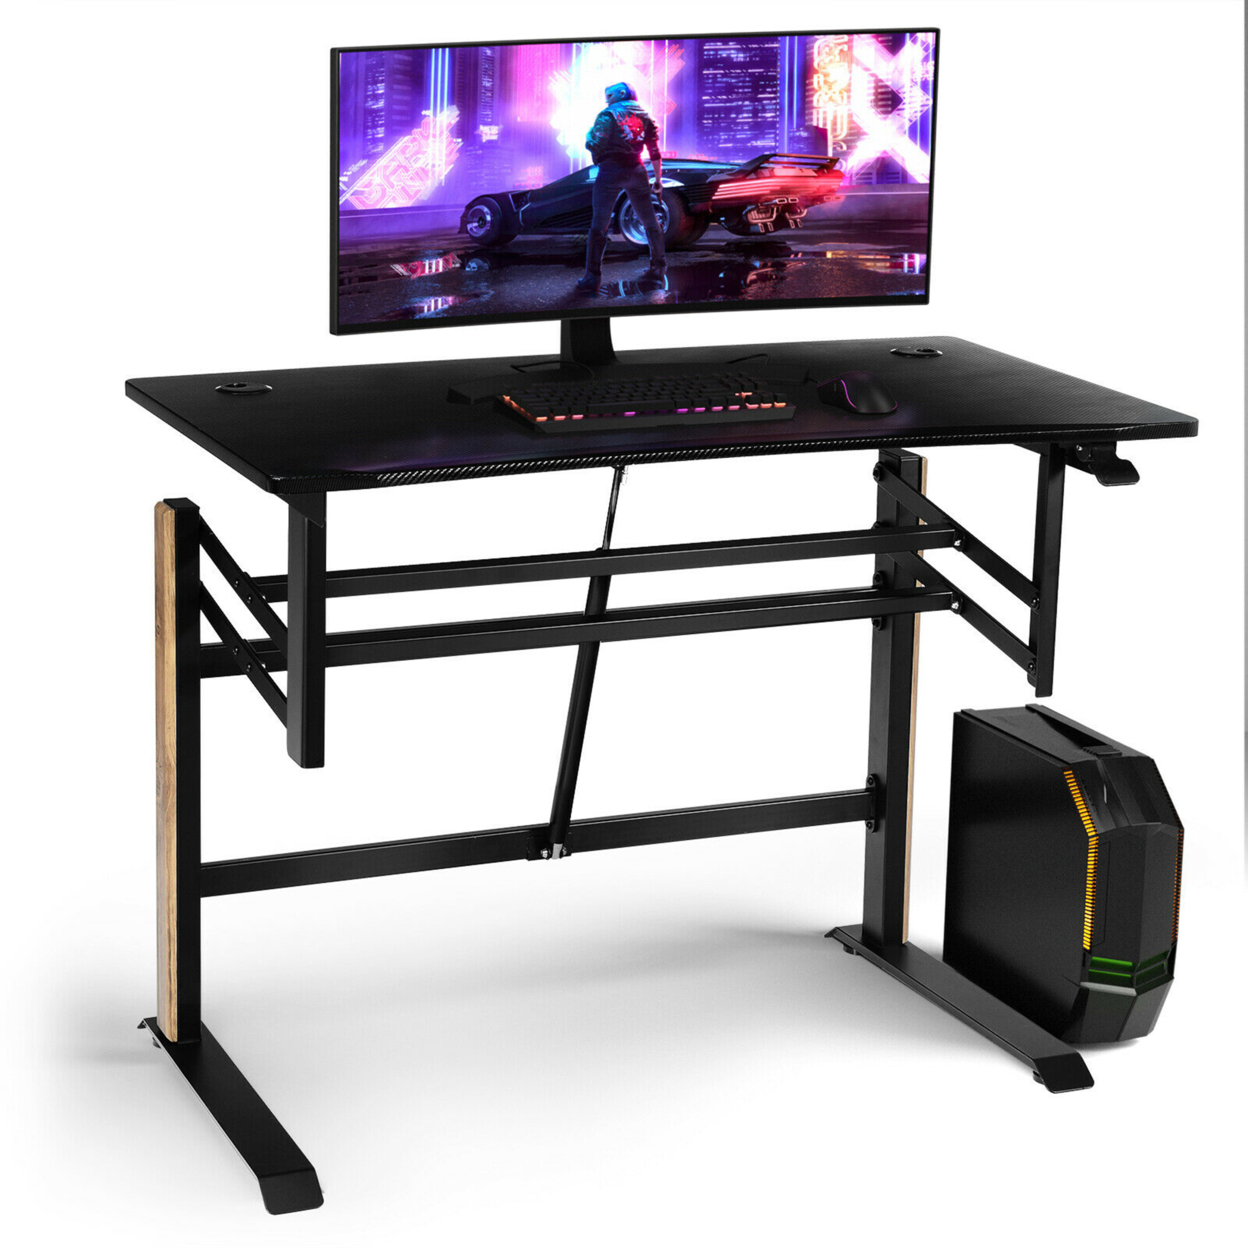 Pneumatic Height Adjustable Gaming Desk T Shaped Game Station W/Power Strip Tray